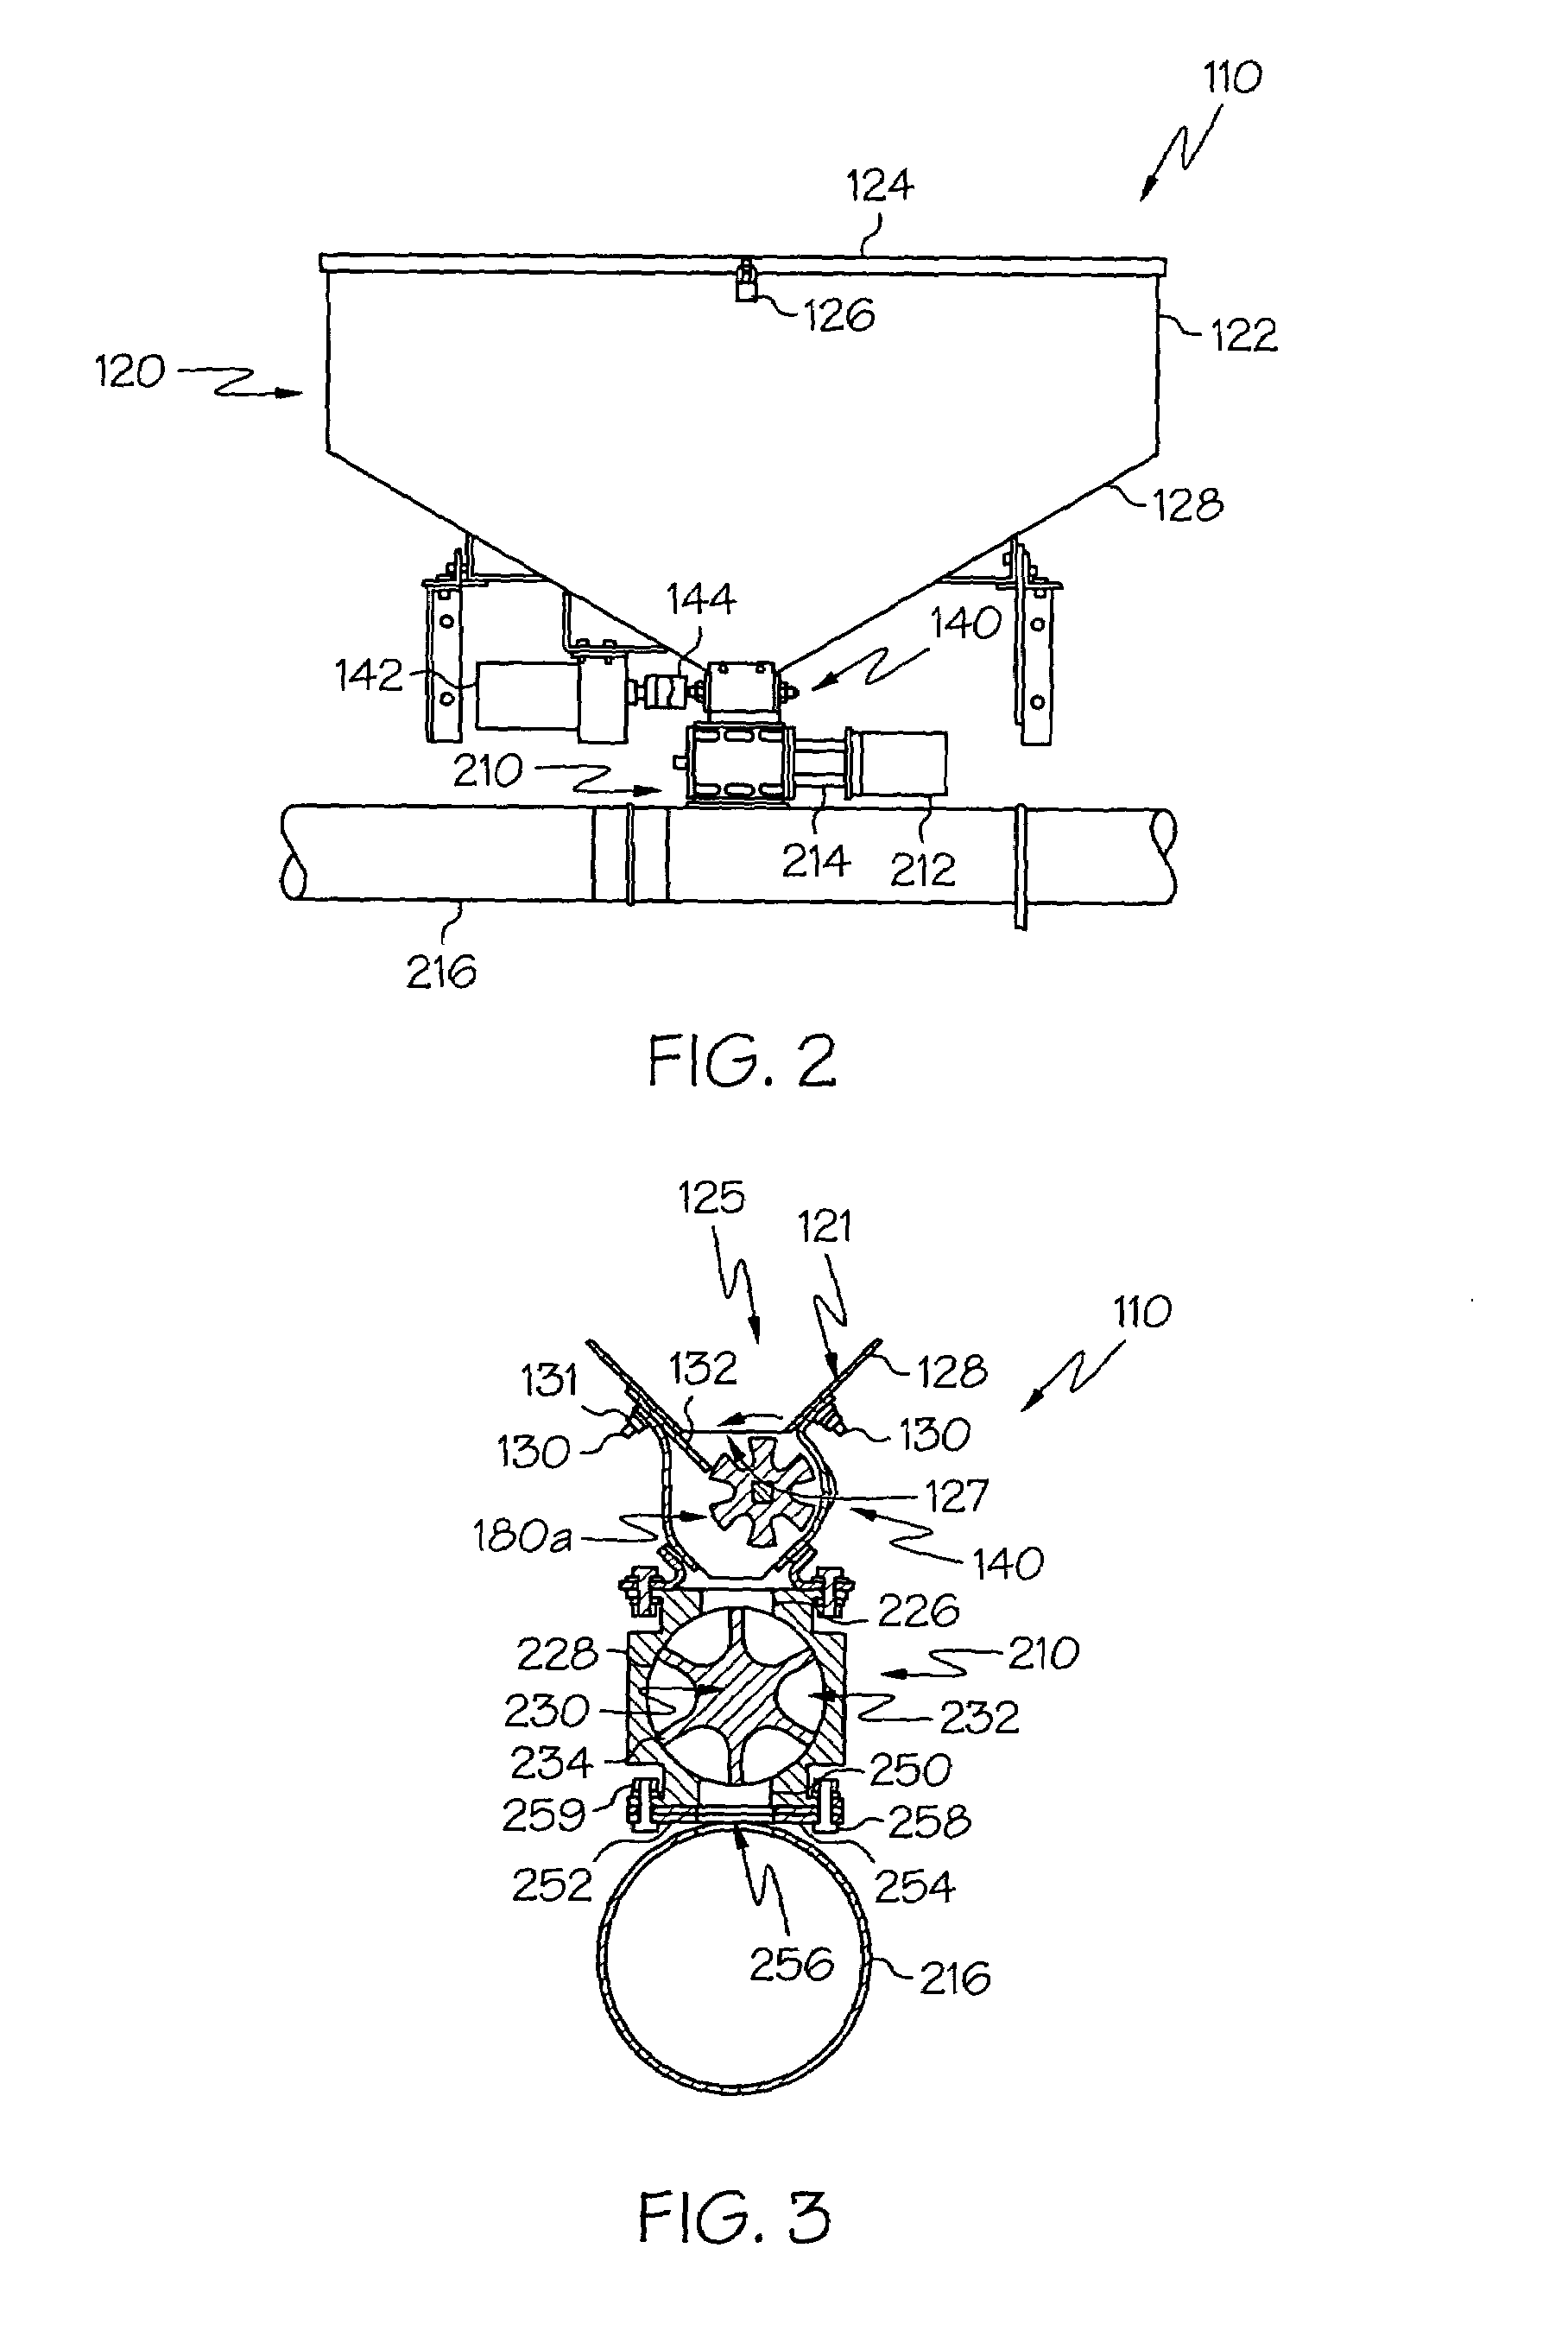 Bulk material discharge assembly with feeding apparatus